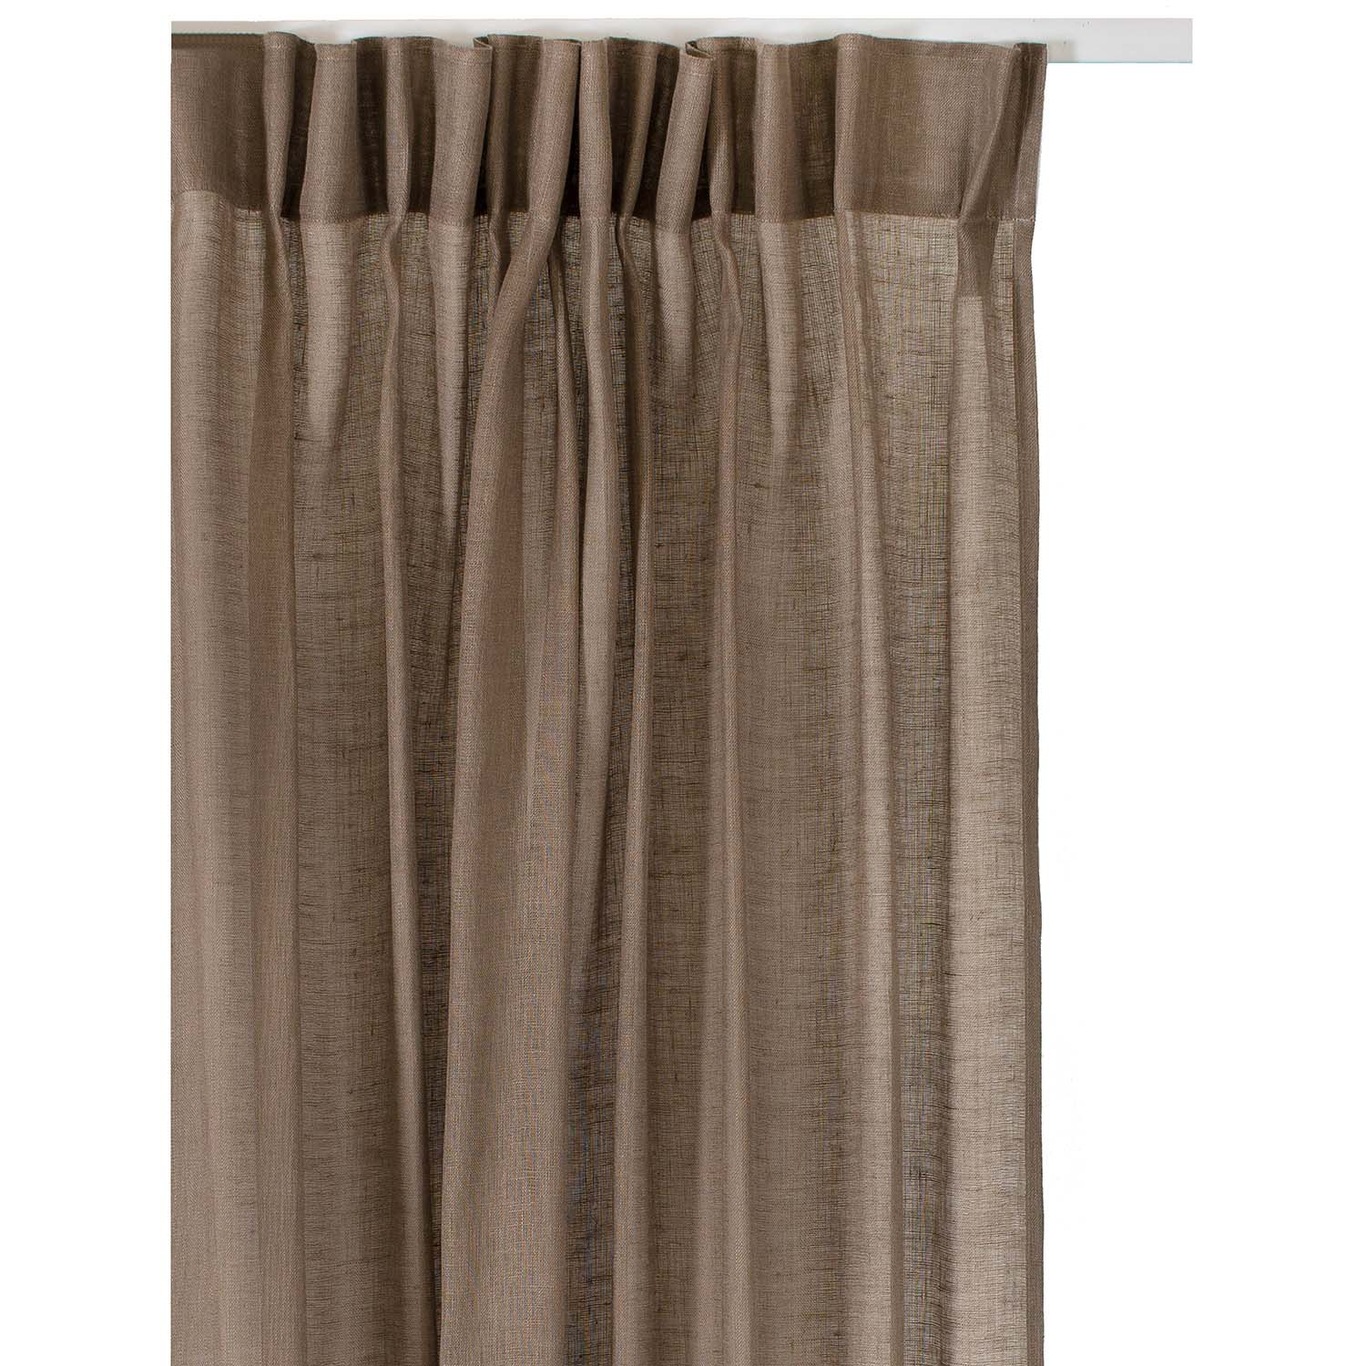 Dalsland Curtain With Heading Tape 145x290 cm, Driftwood